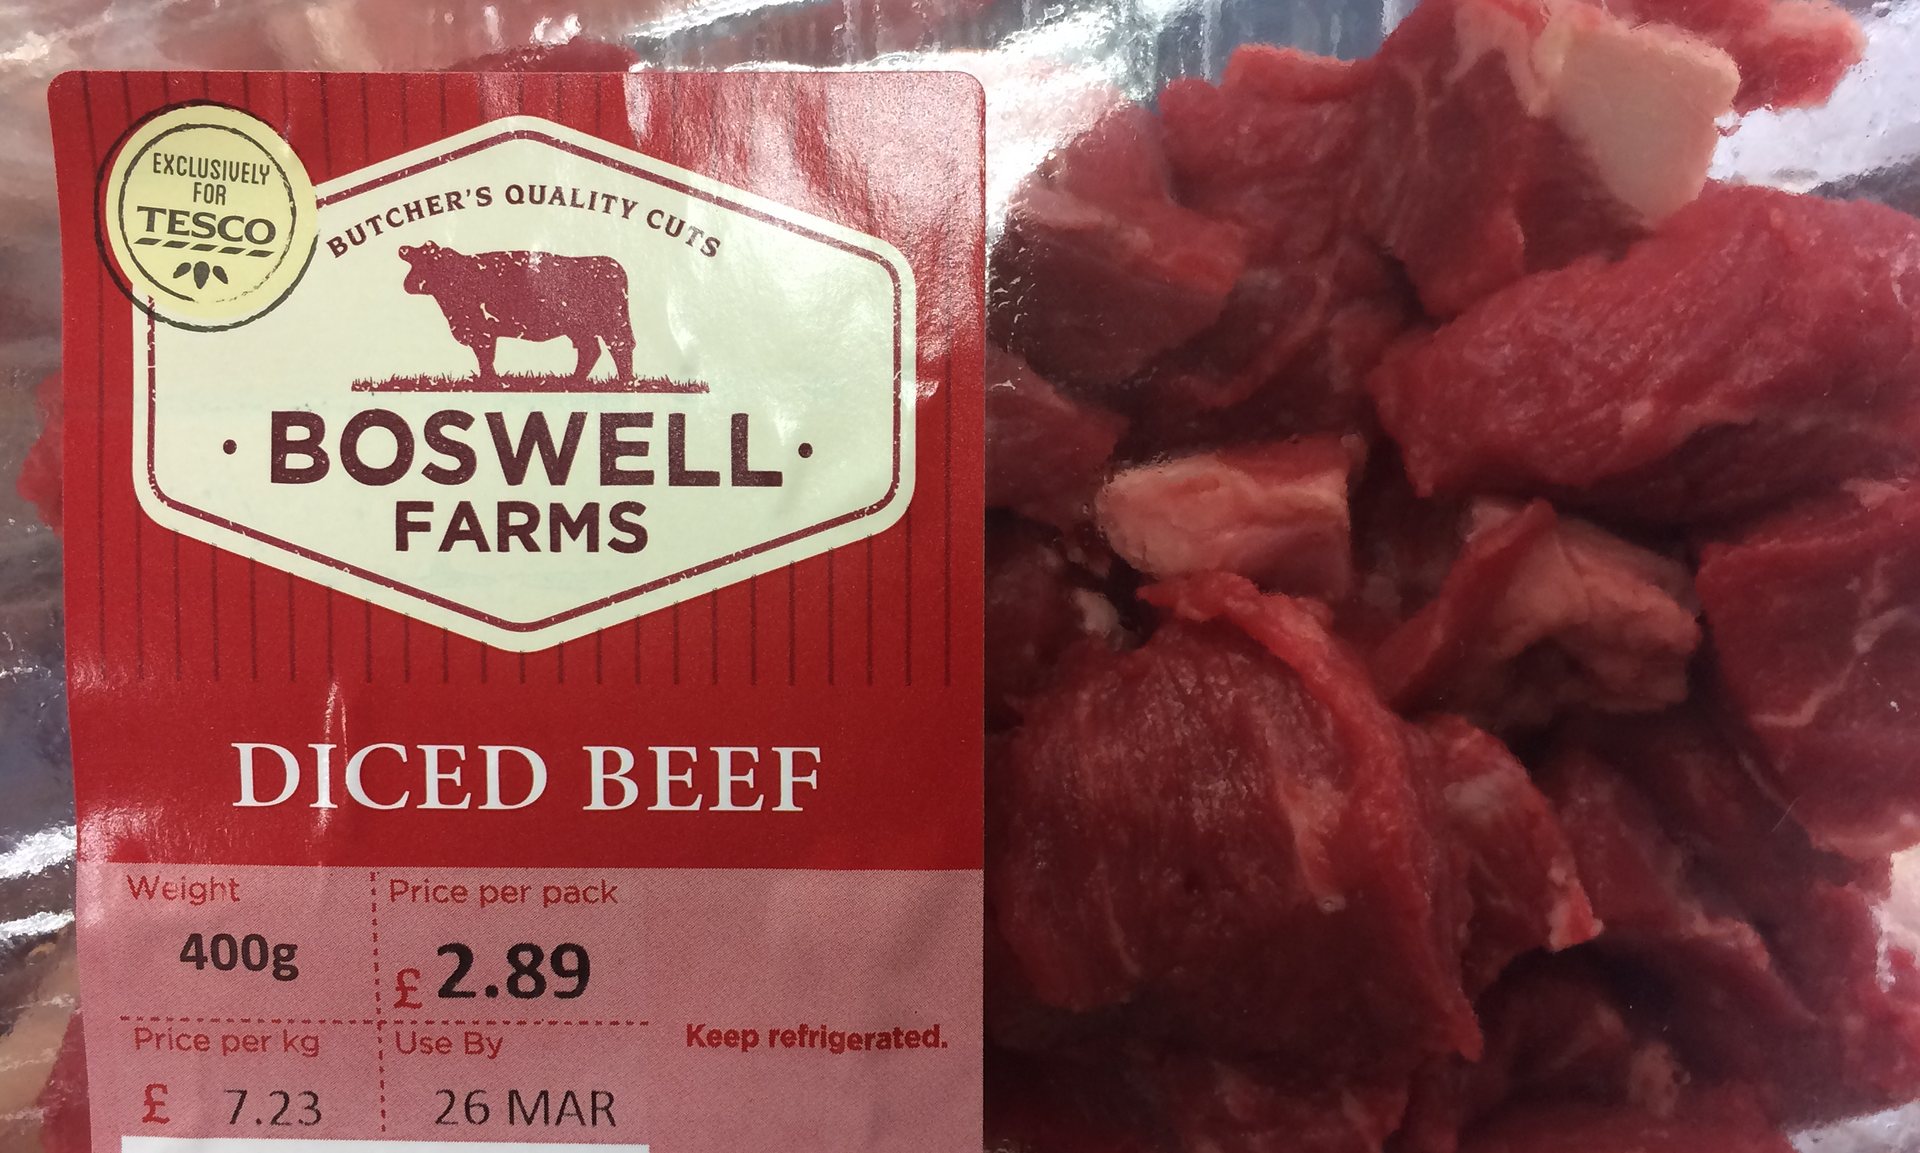 Boswell Farm and Woodside Farm might sound like the perfect place to source your meat from. The problem is, they don’t exist